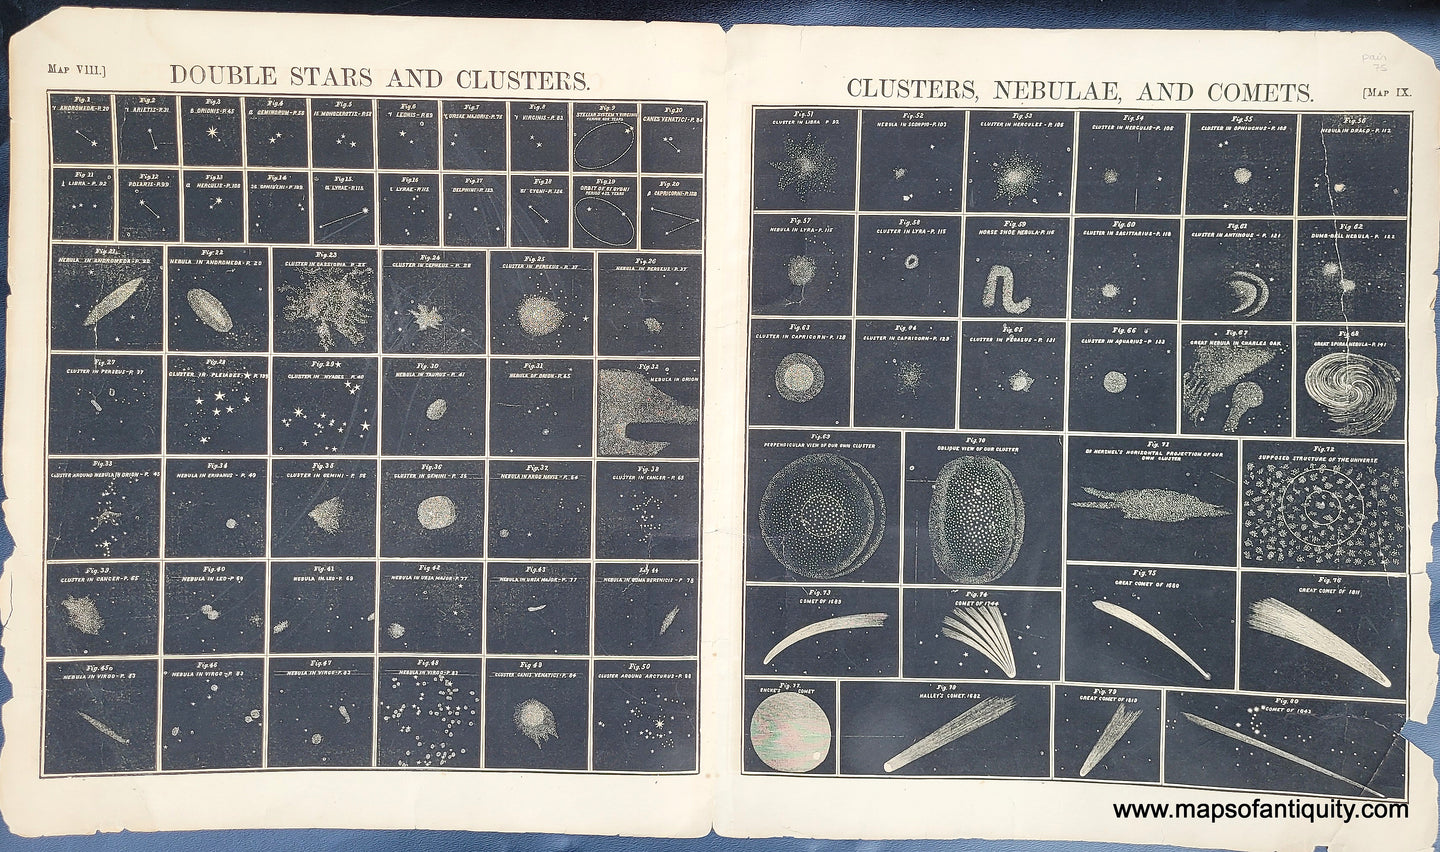 Black-and-White-Antique-Illustration-Double-Stars-and-Clusters-Clusters-Nebulae-and-Comets--Celestial--1856-Burritt-Maps-Of-Antiquity